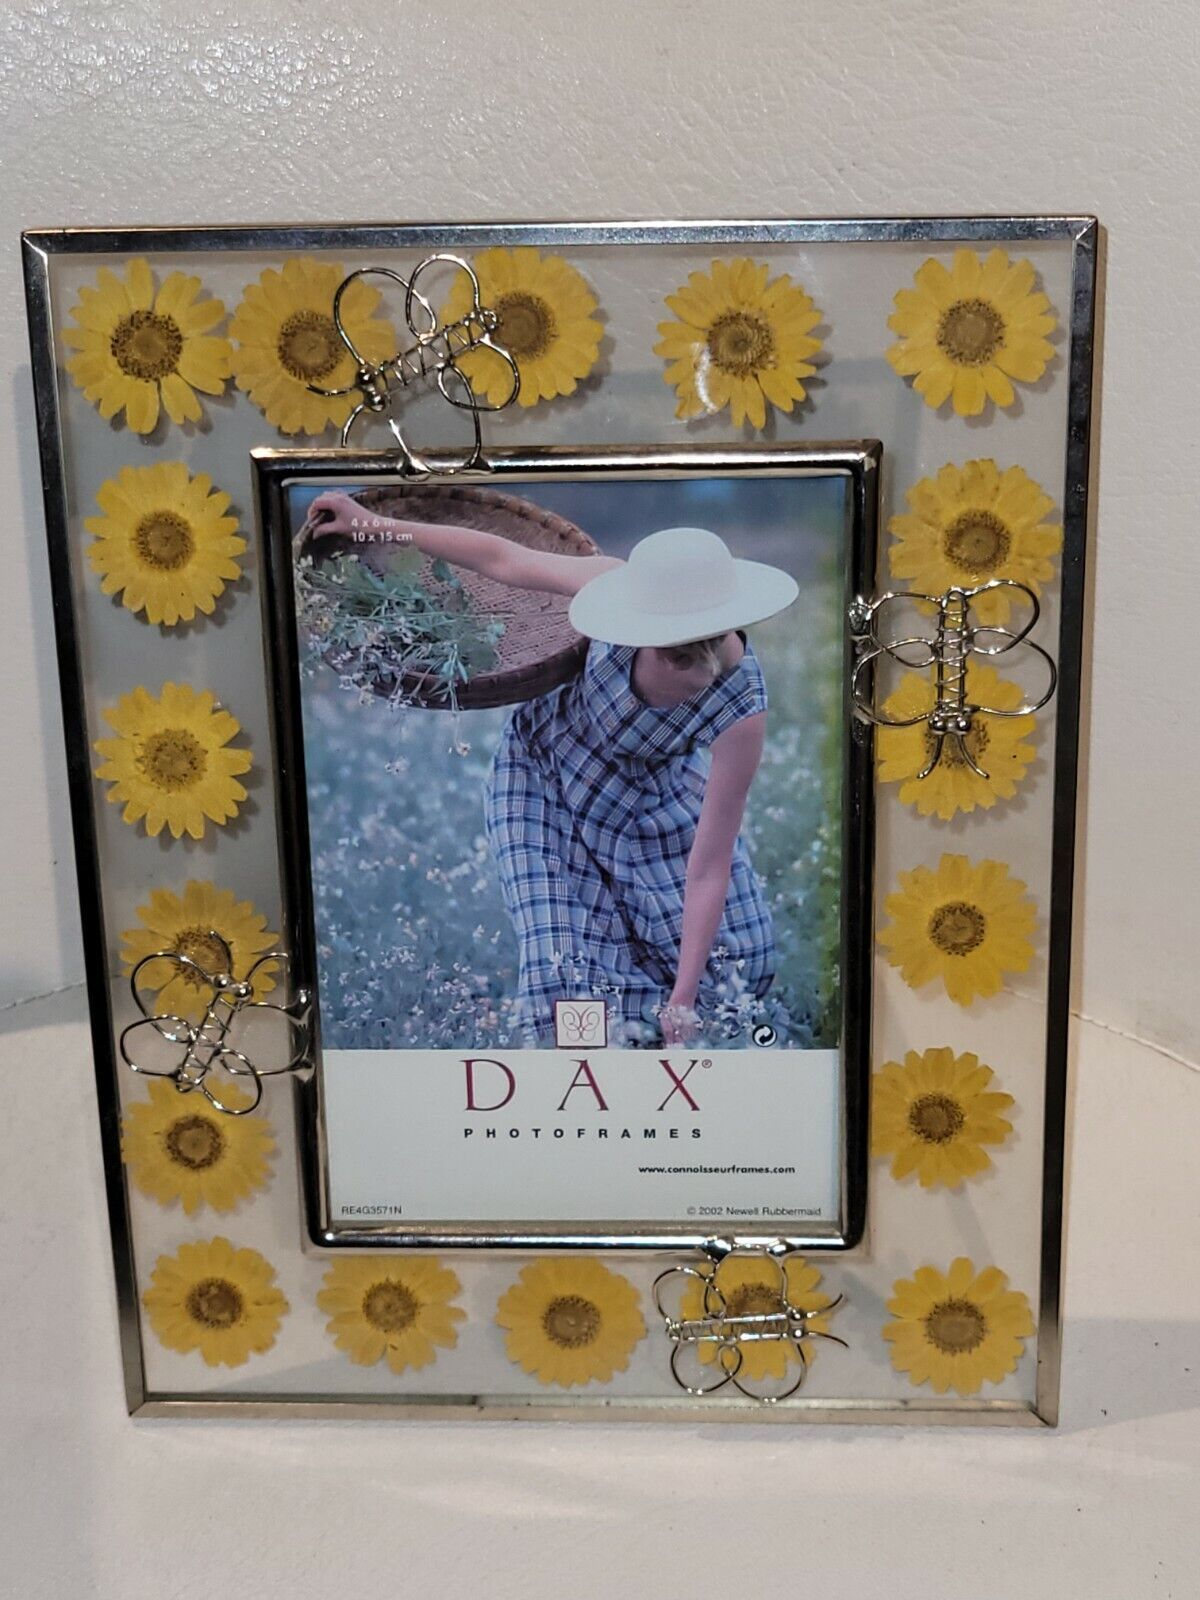 Vintage dax Glass PhotoFrame Silver Butterfly Floral Pressed Flowers - $26.18